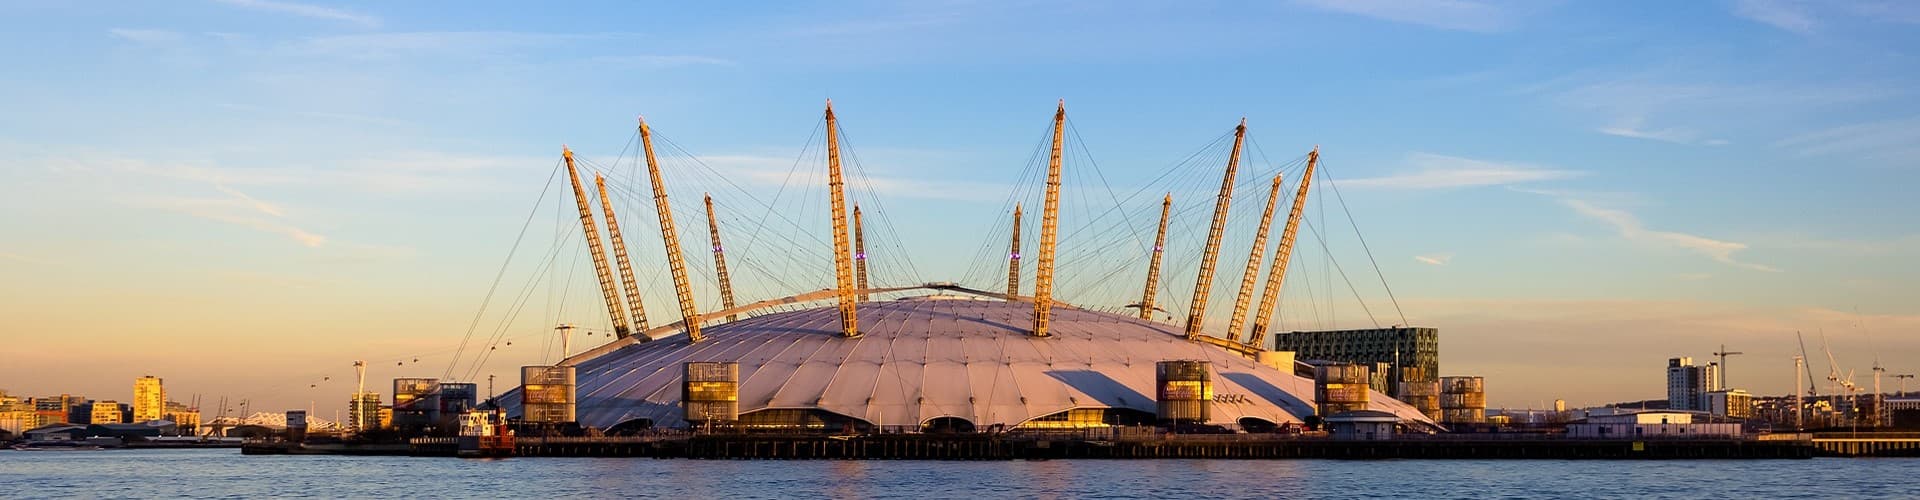 TheUltimateGuideToVisitingTheUpAtTheO2Banner